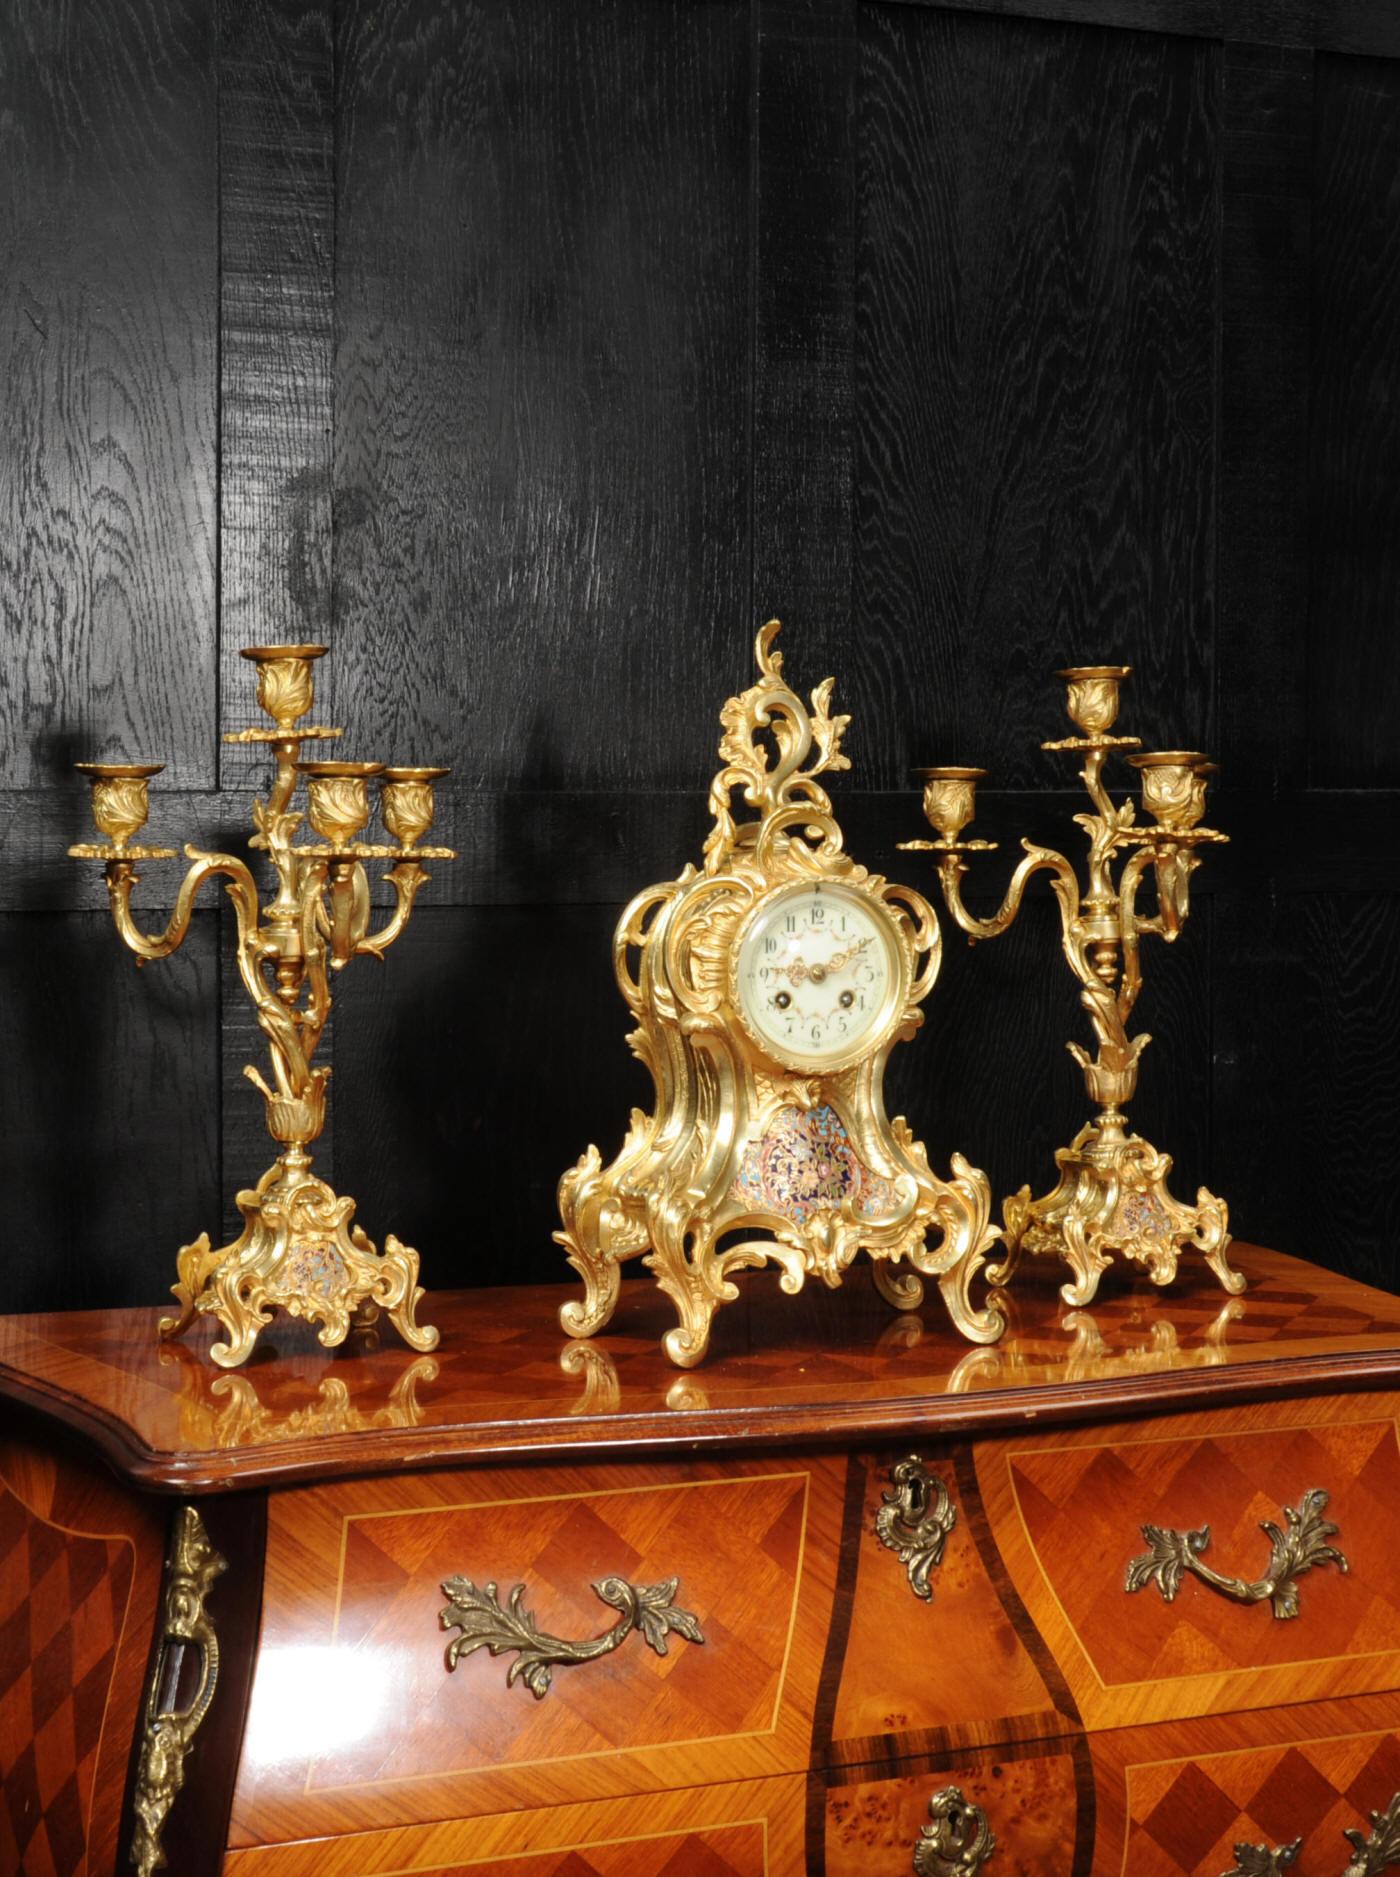 A rare and stunning original antique French clock set, in gilt bronze. It is beautifully designed in the Rococo style and features exquisite cloisonné or champlevé enamel work to both the clock and candelabrum. It has an elegant waisted, asymmetric